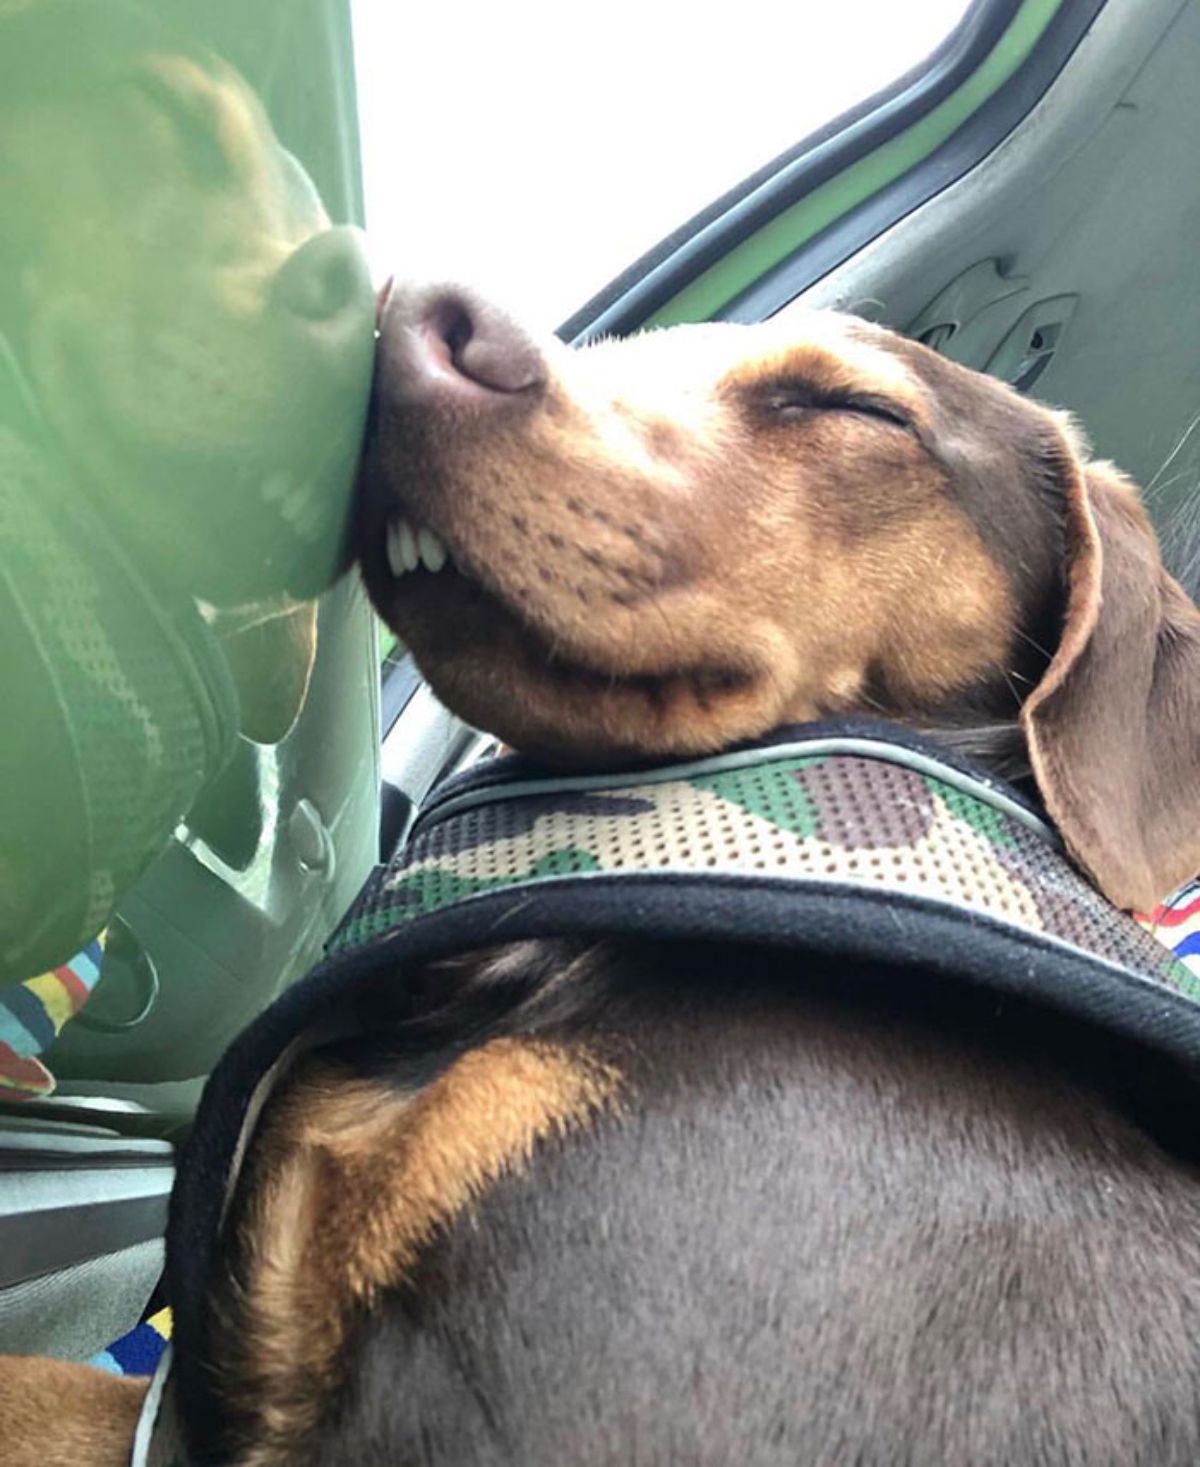 brown dog sleeping with the nose against the inside of a green car door with the teeth showing